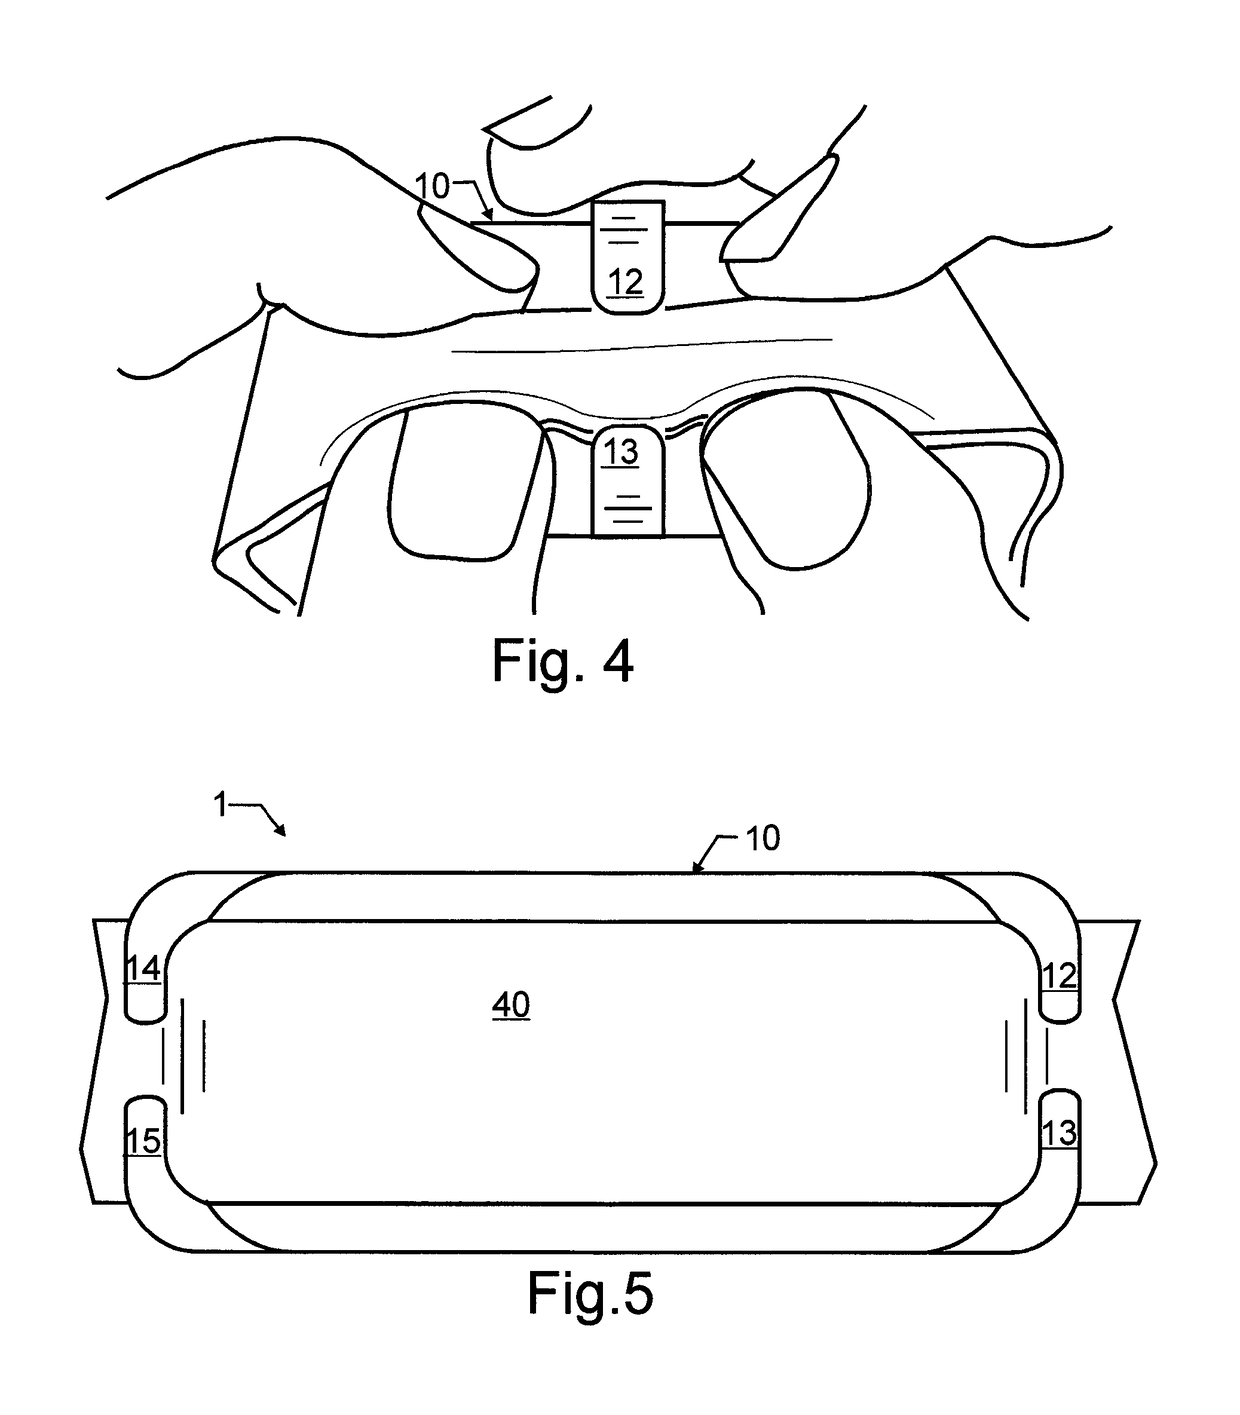 Wireless location assisted zone guidance system incorporating a rapid collar mount and non-necrotic stimulation